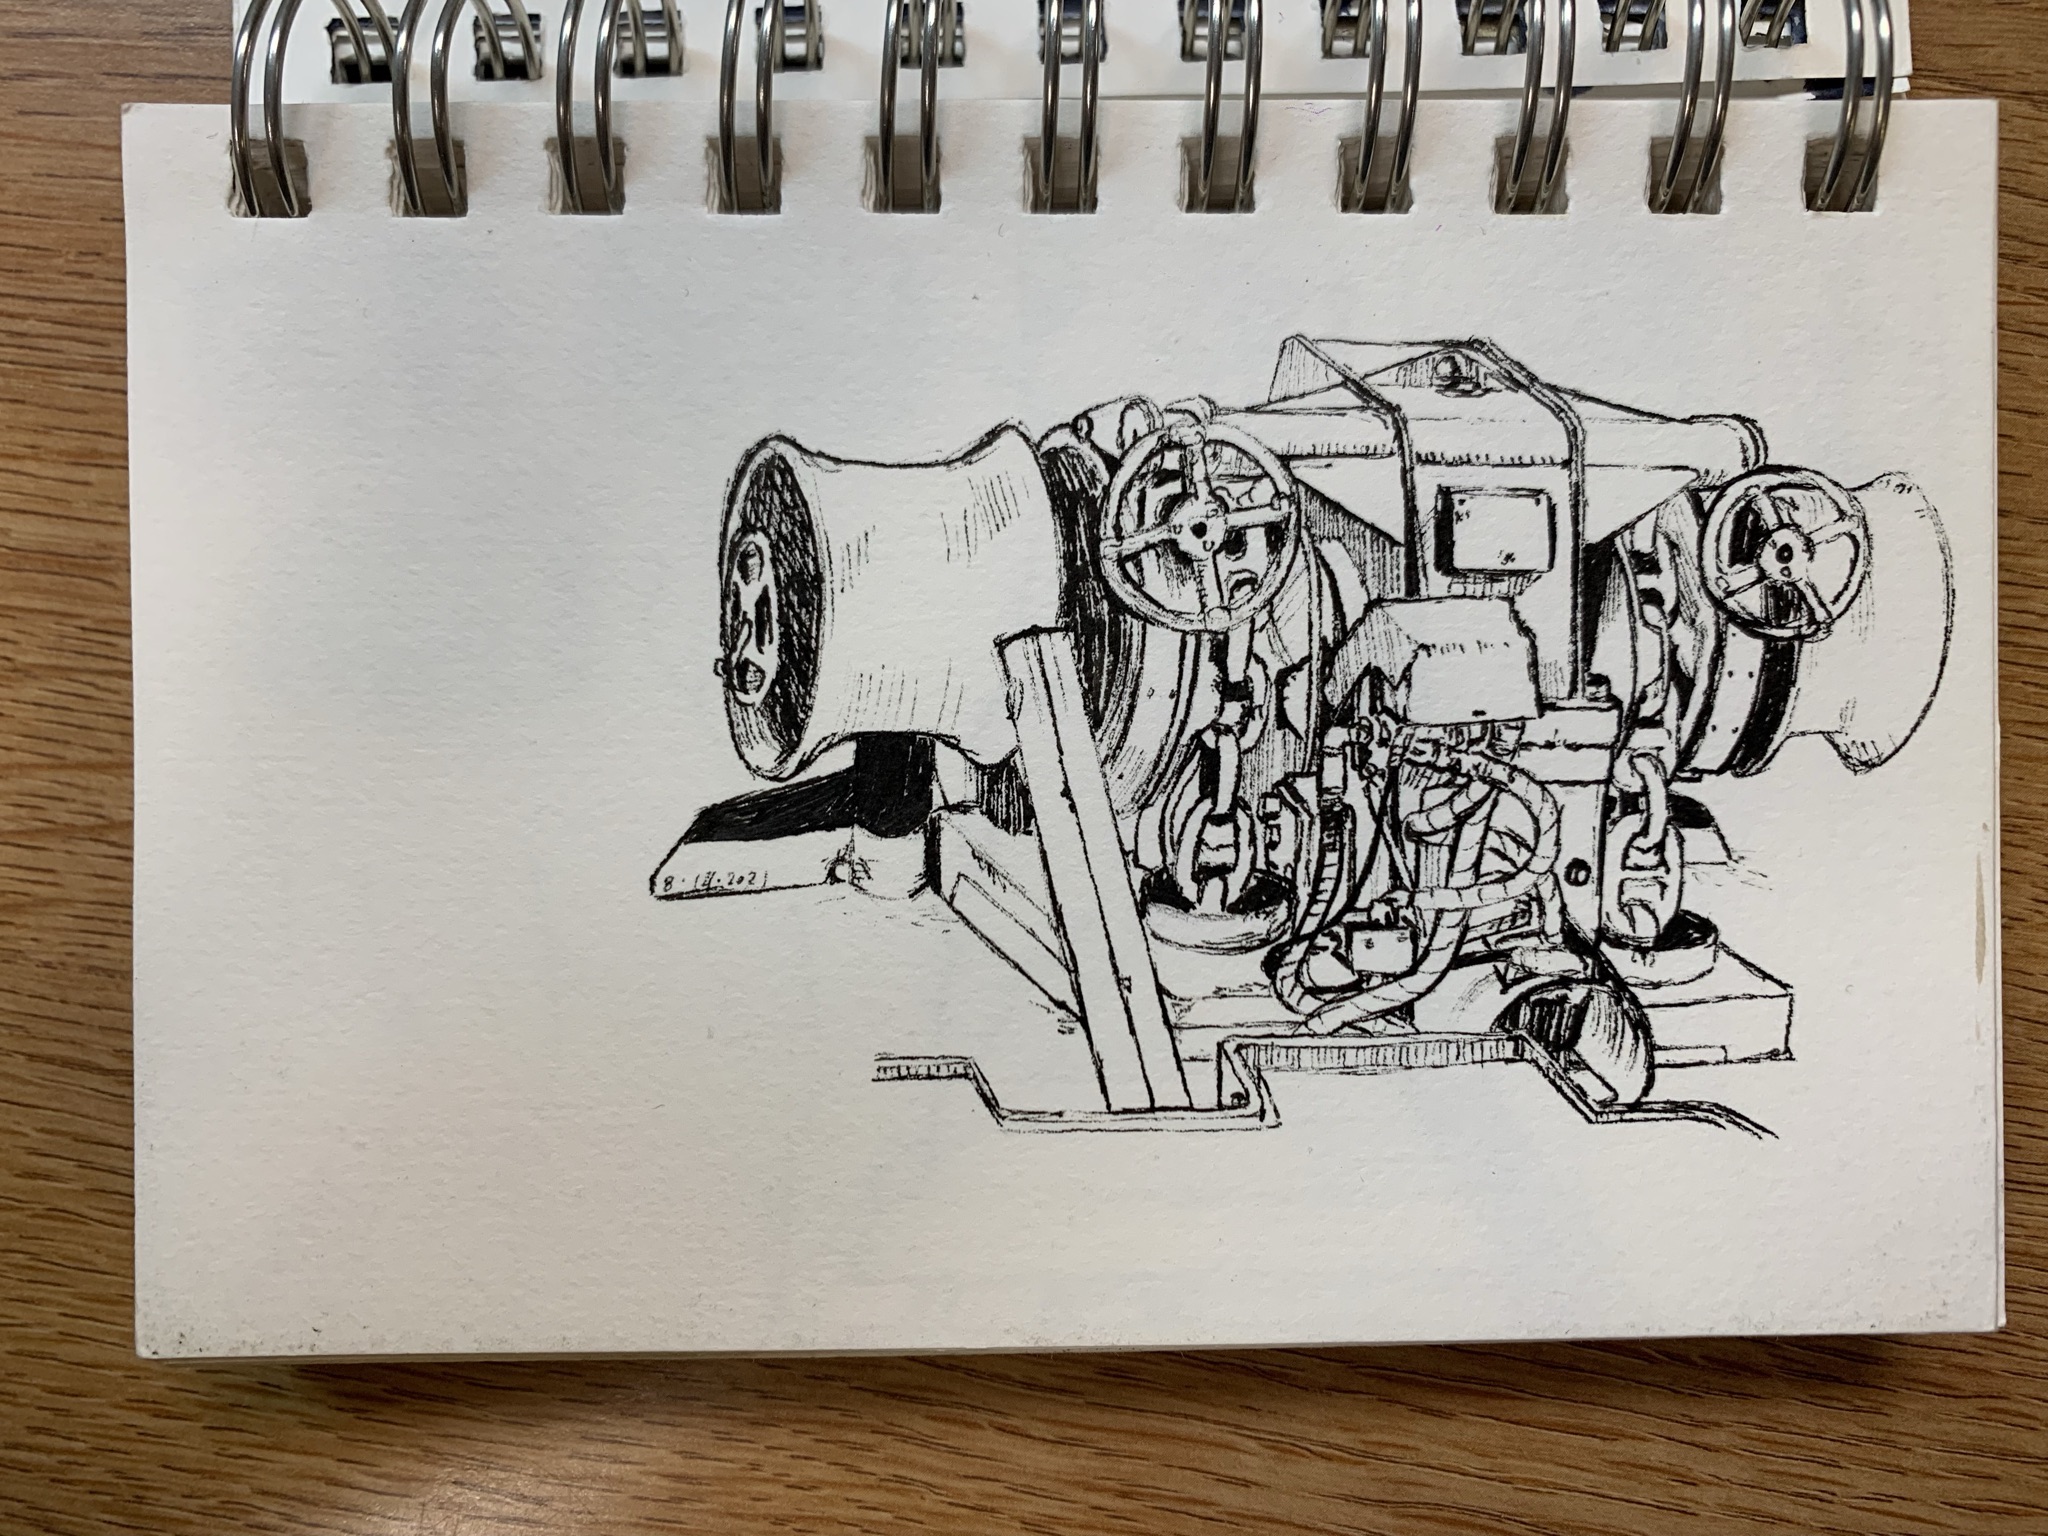 A pen-and-ink drawing of the R/V Thompson’s anchor mechanism.